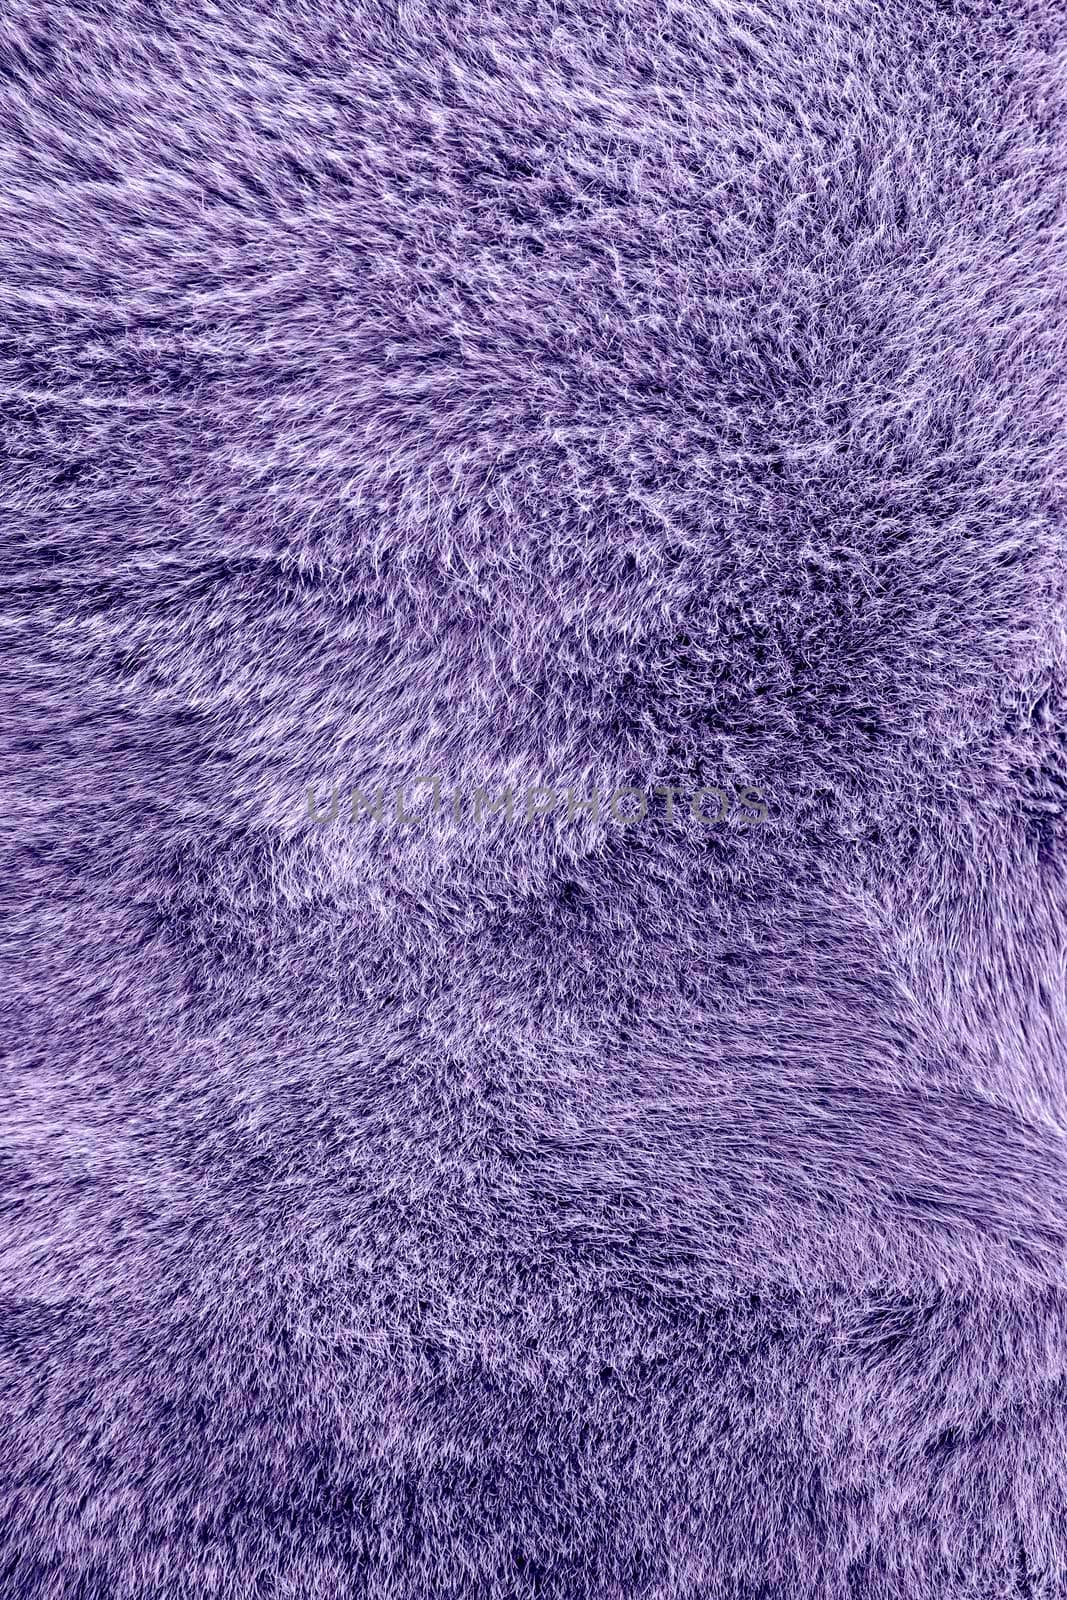 Texture of a cow coat toned in purple. Light purple or violet cow hair Close up. Real genuine natural fur. Banner with copy space for text.